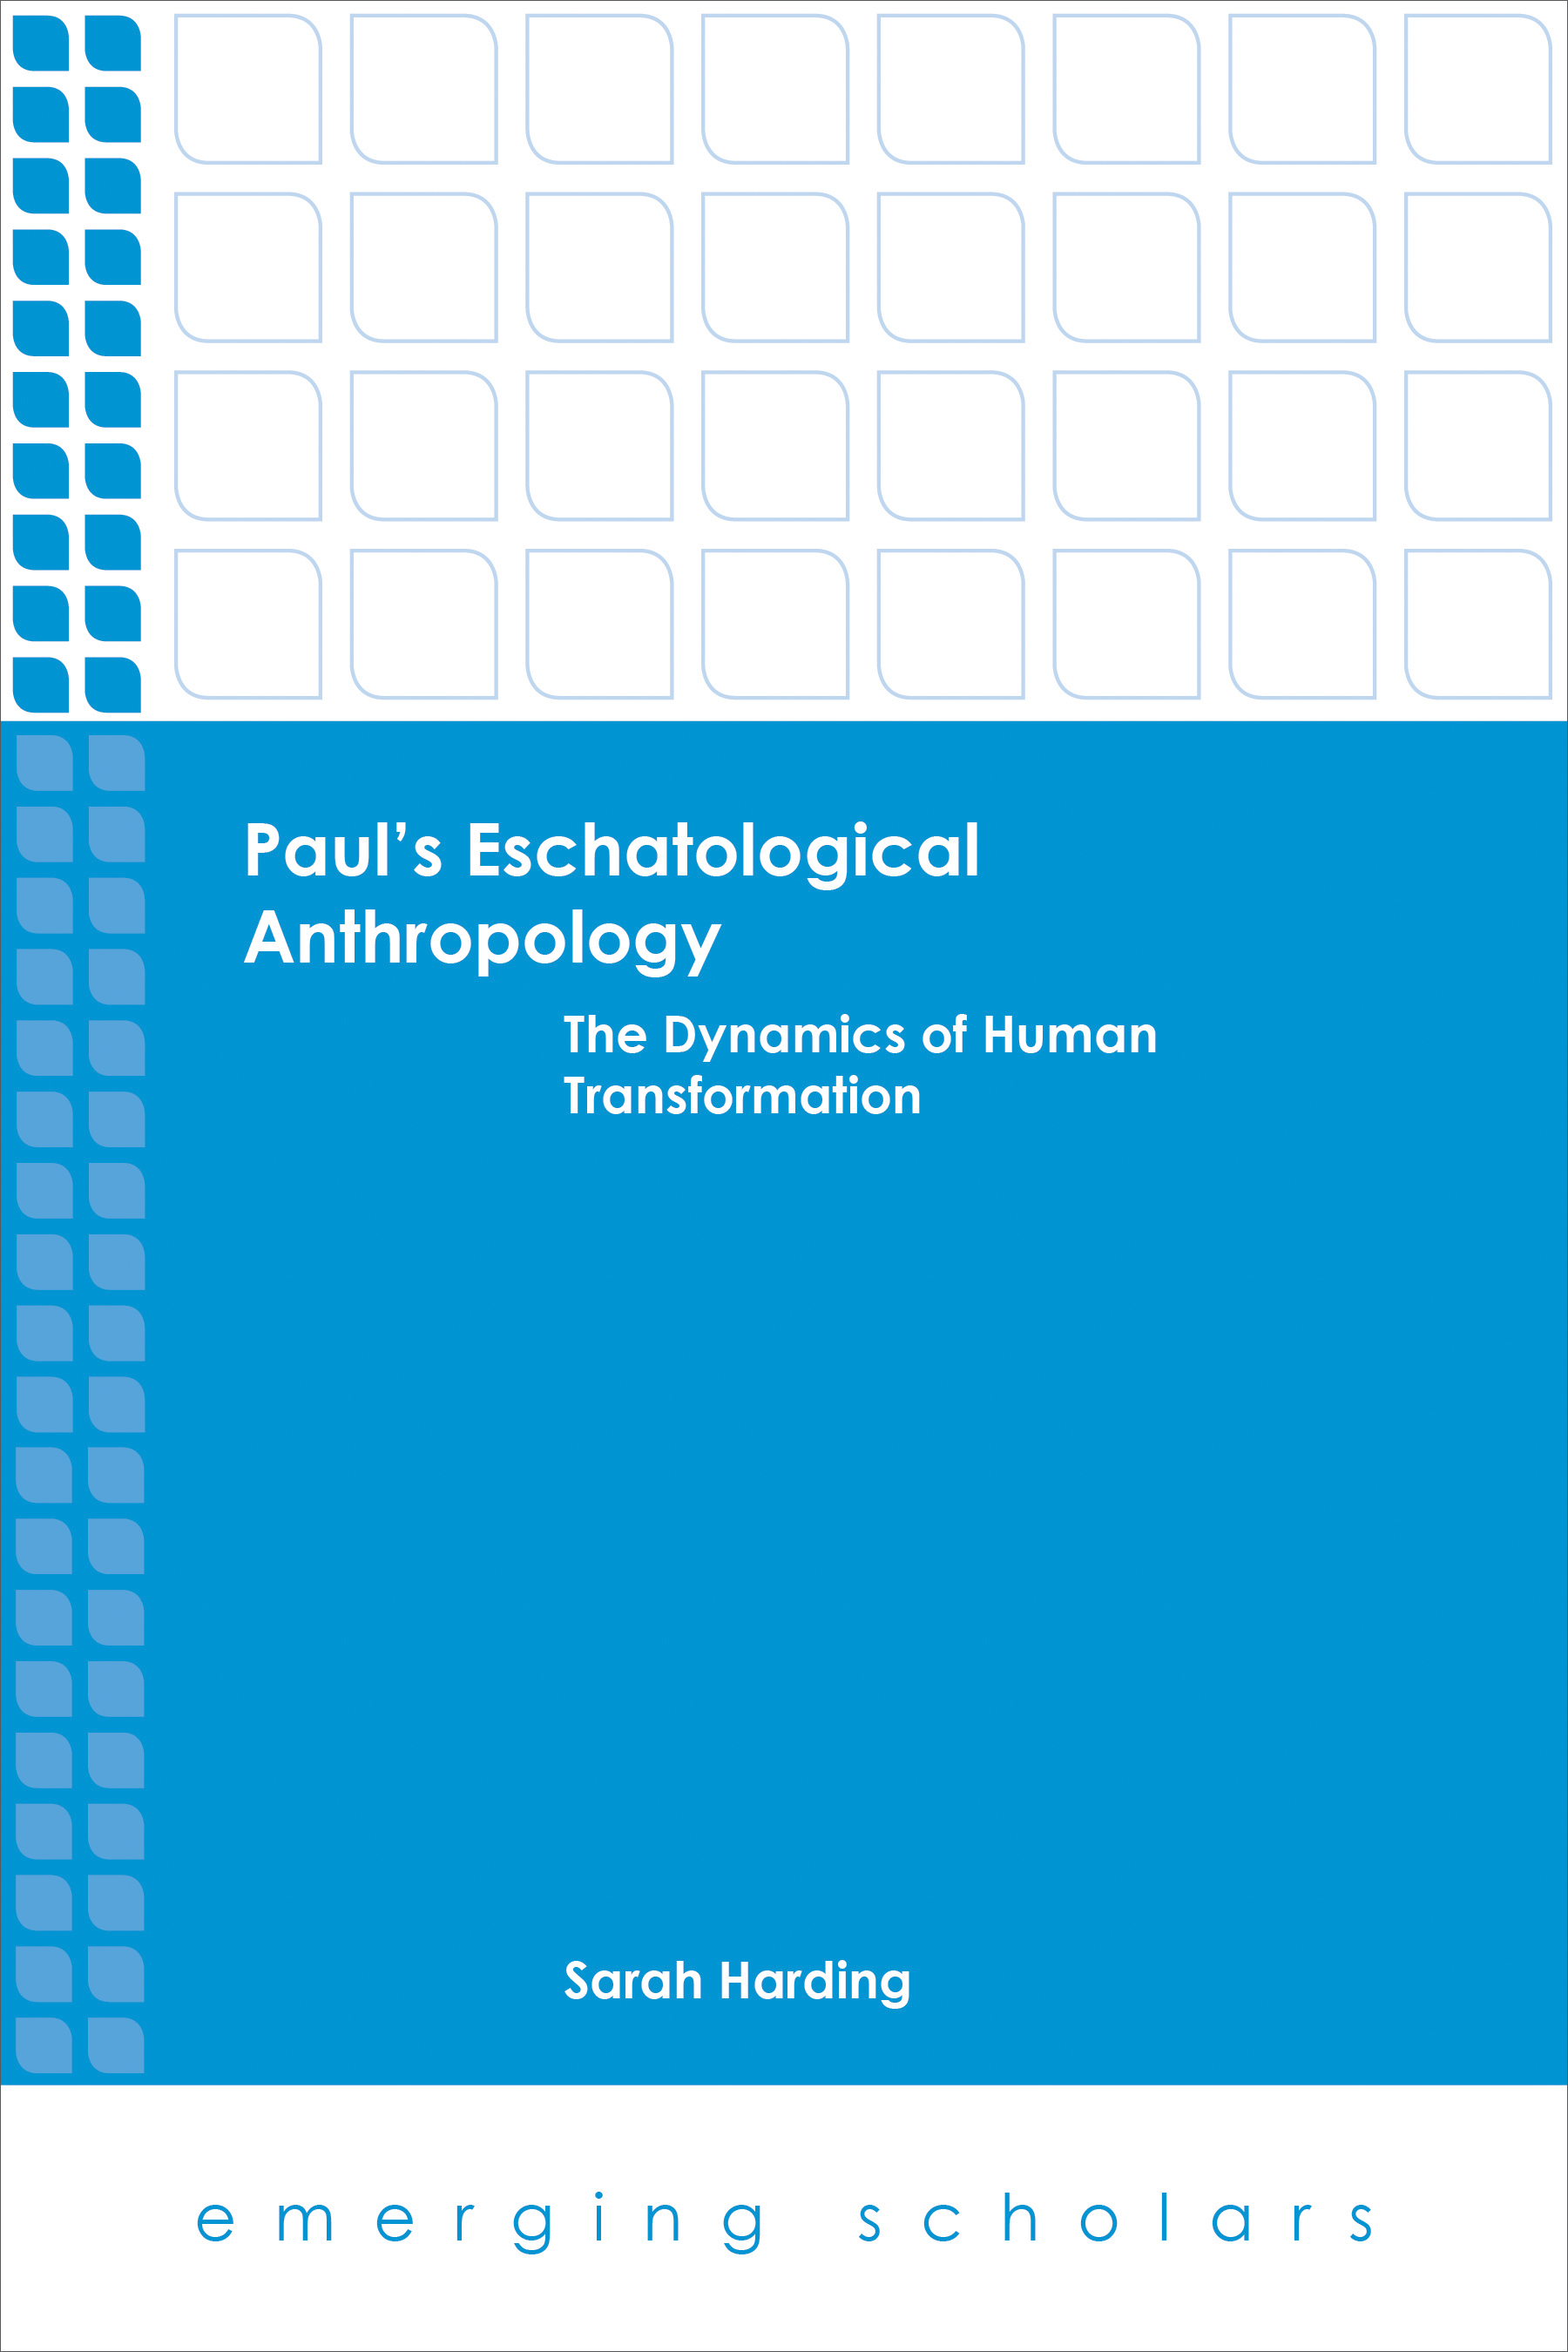 Paul's Eschatological Anthropology: The Dynamics of Human Transformation